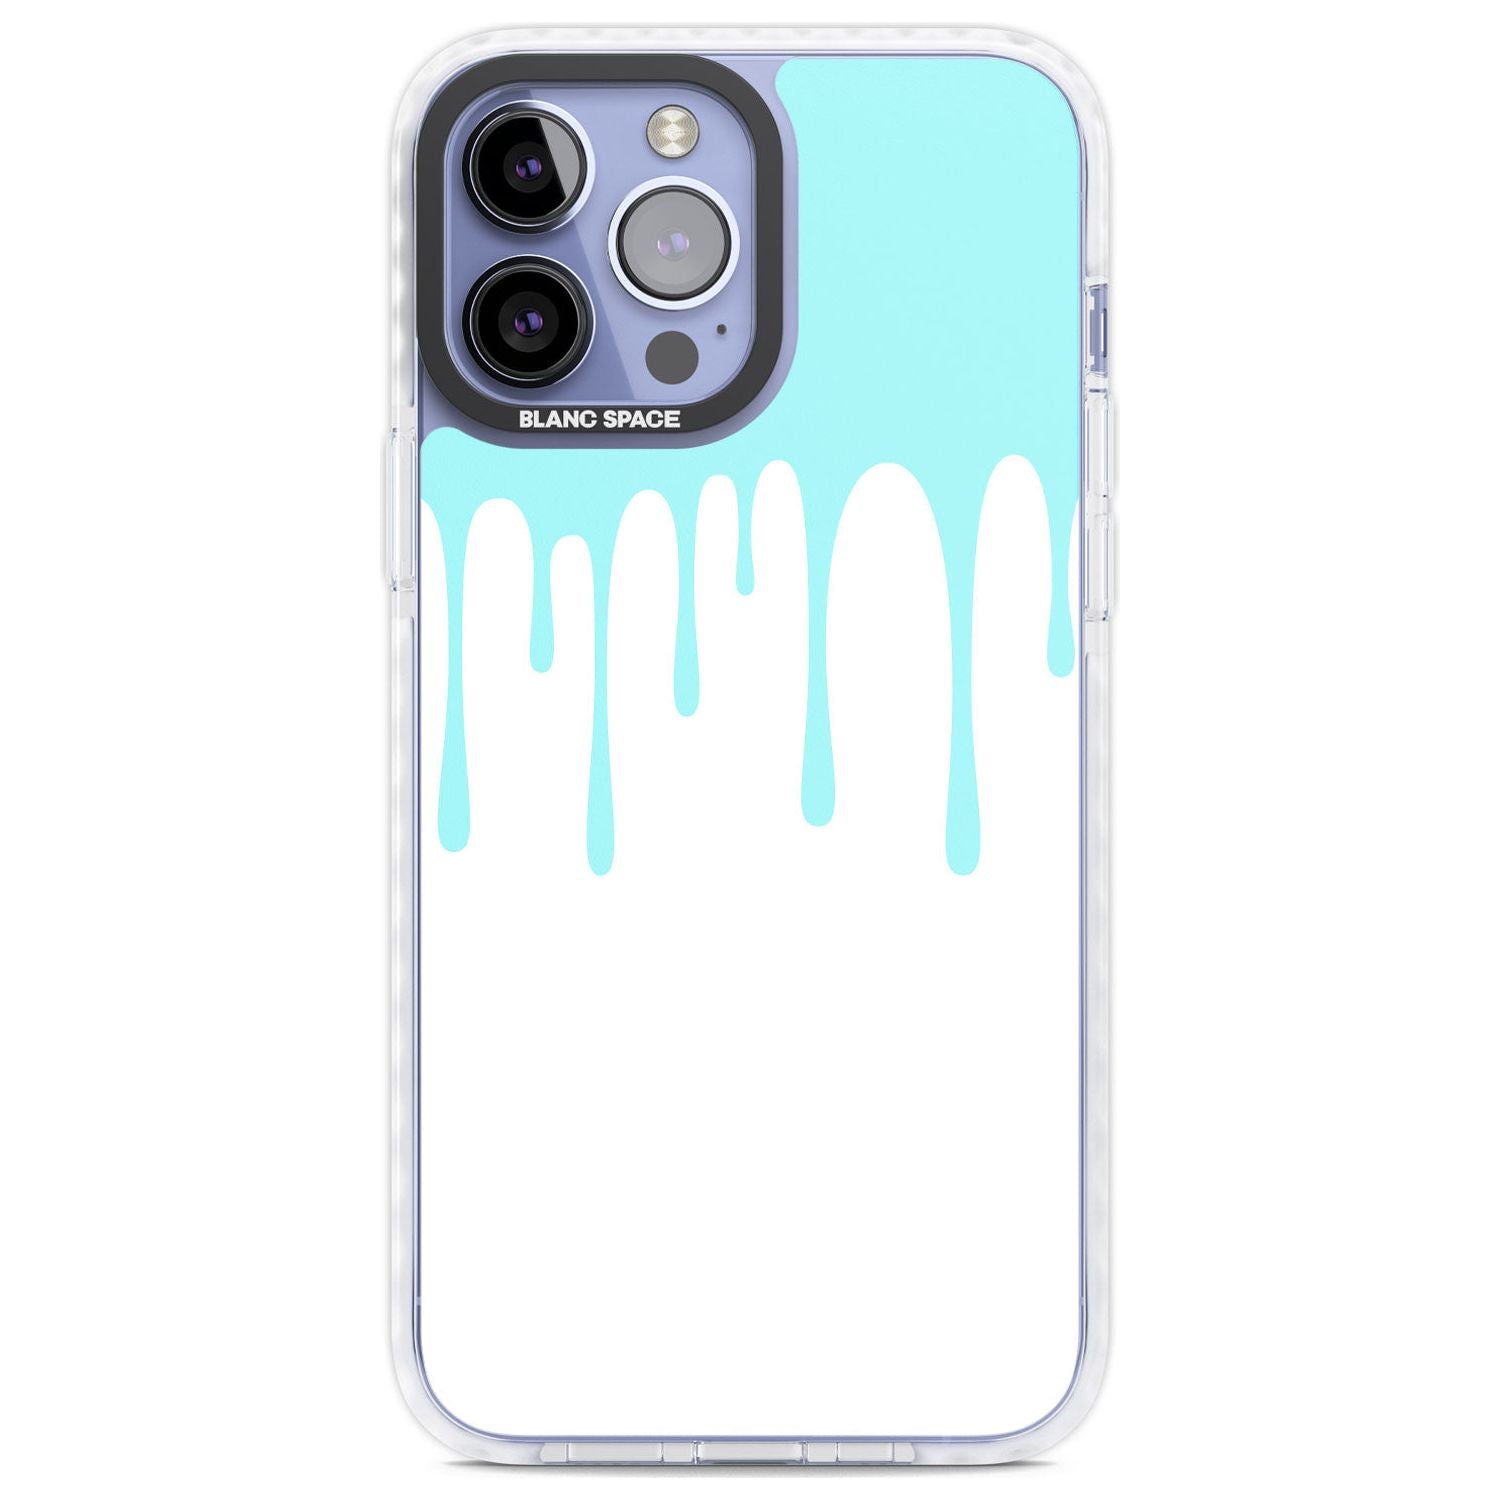 Melted Effect: Teal & White Phone Case iPhone 13 Pro Max / Impact Case,iPhone 14 Pro Max / Impact Case Blanc Space